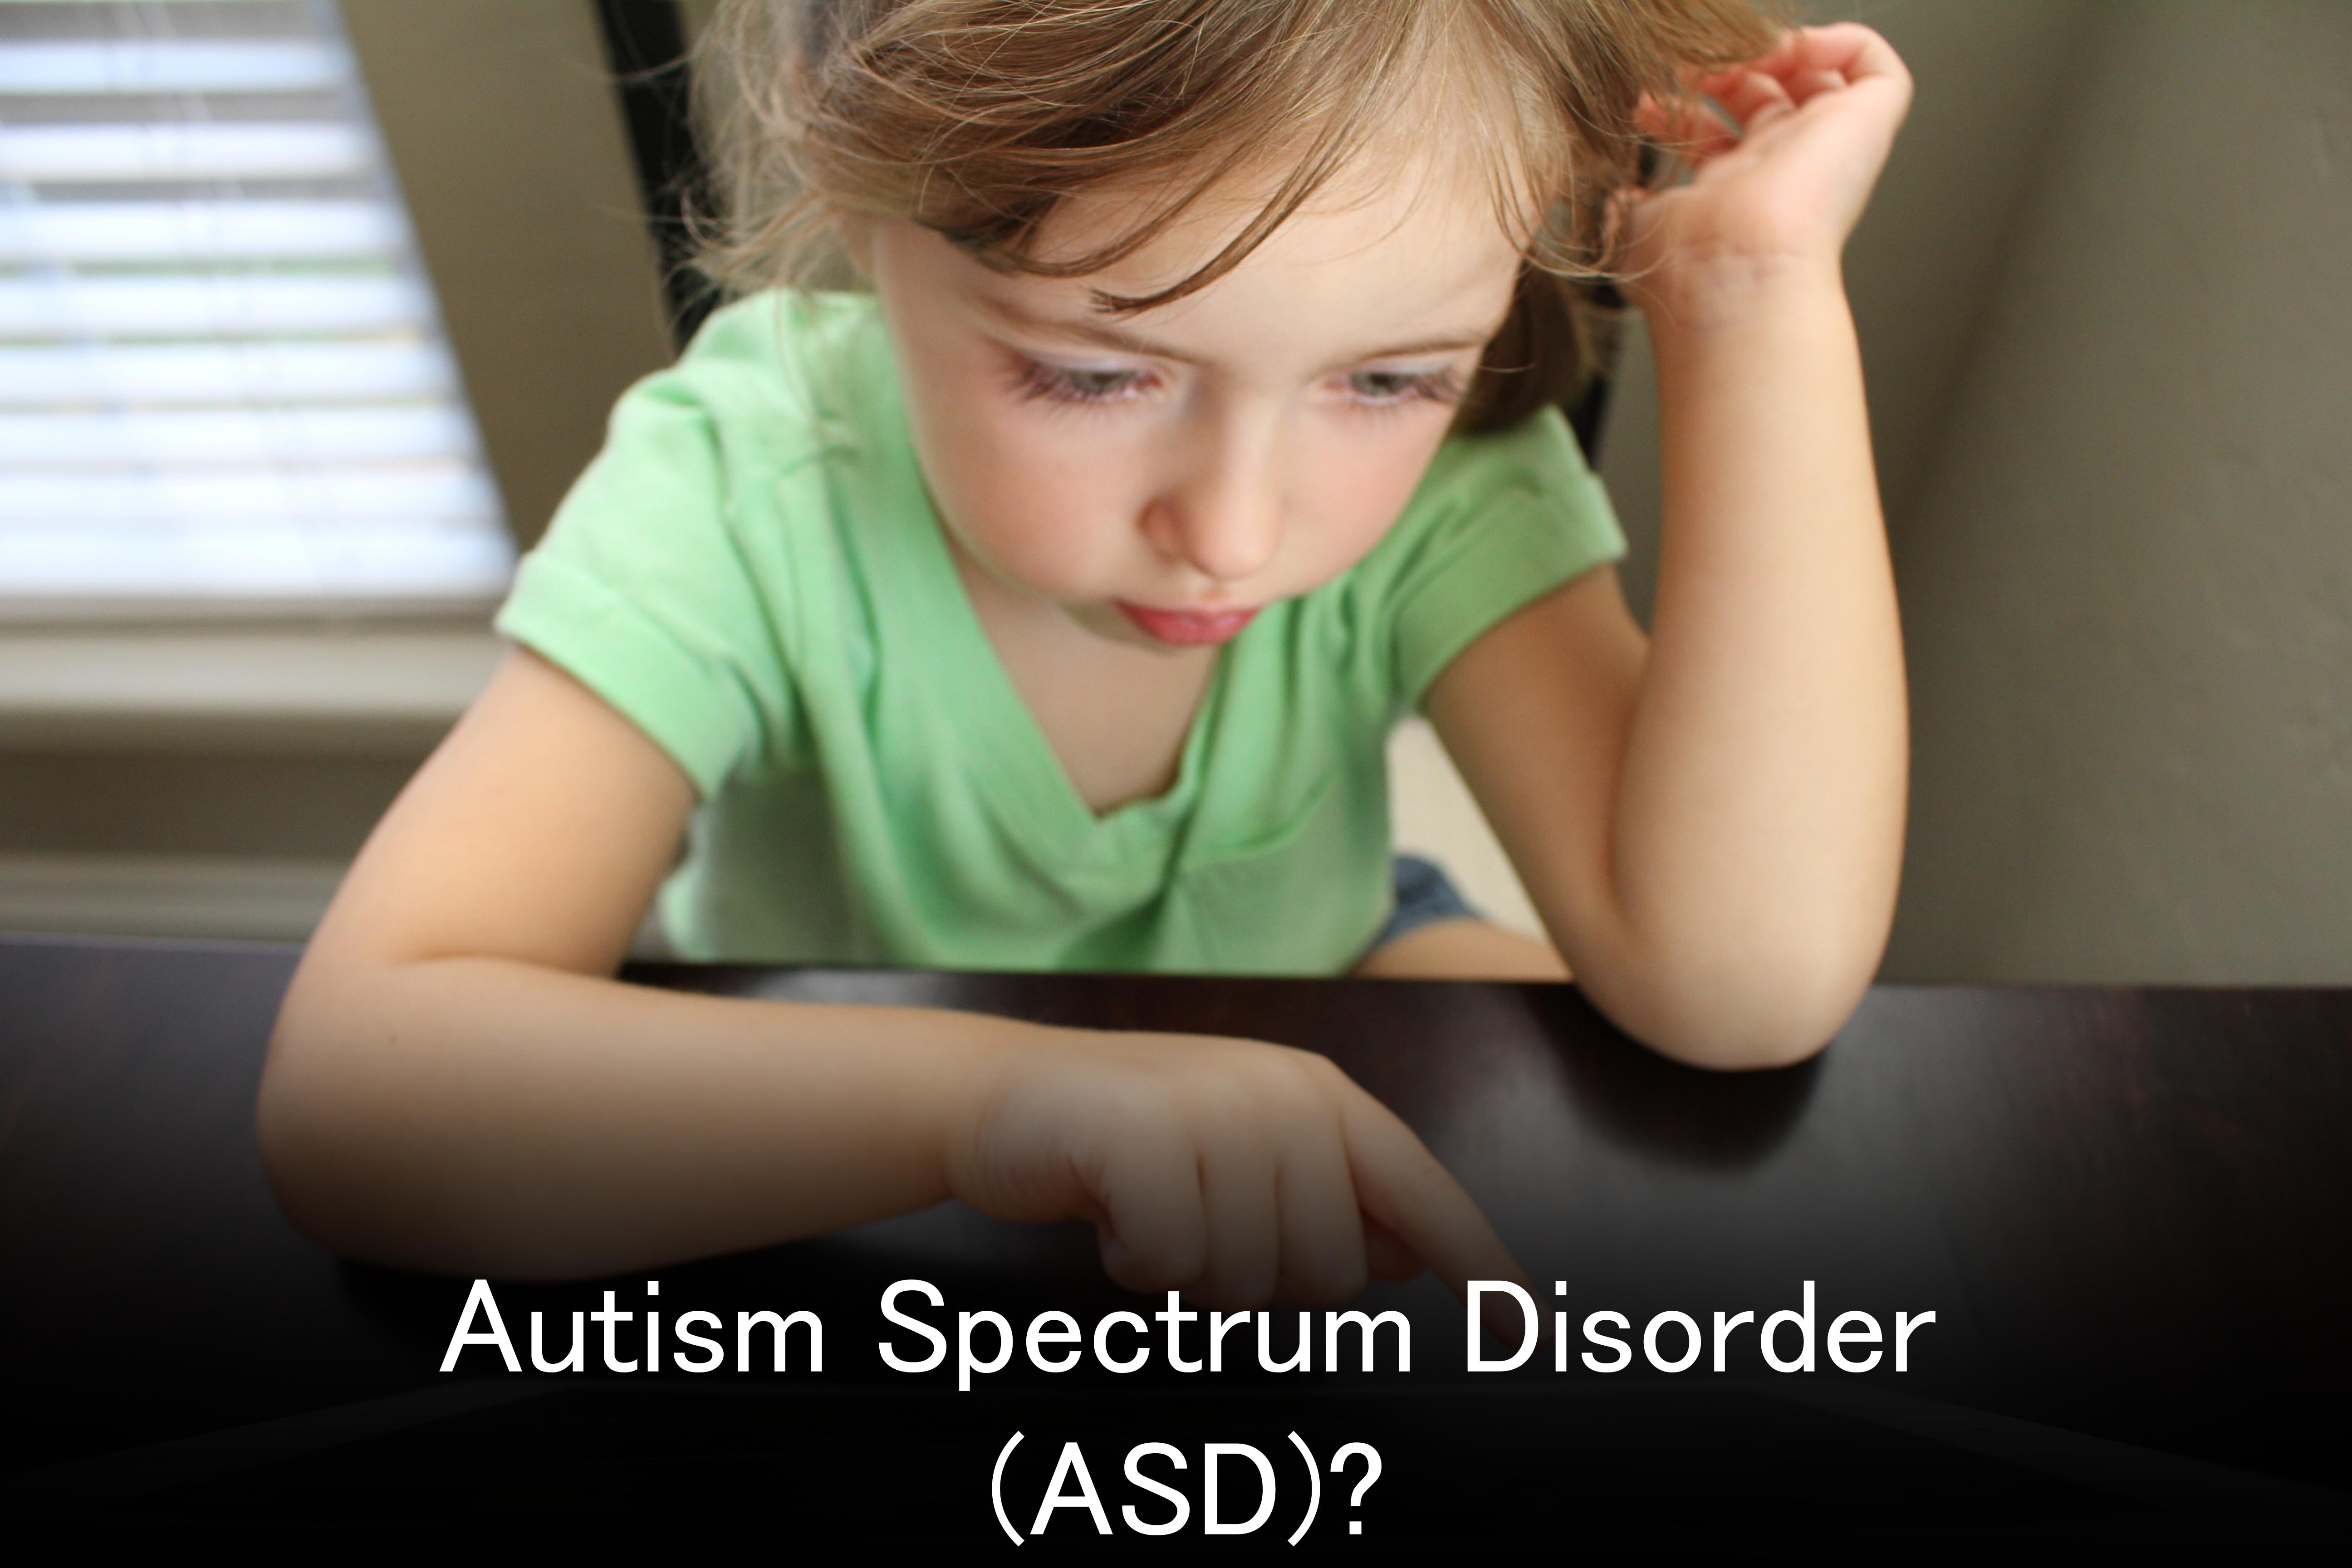 autism and speech disorders